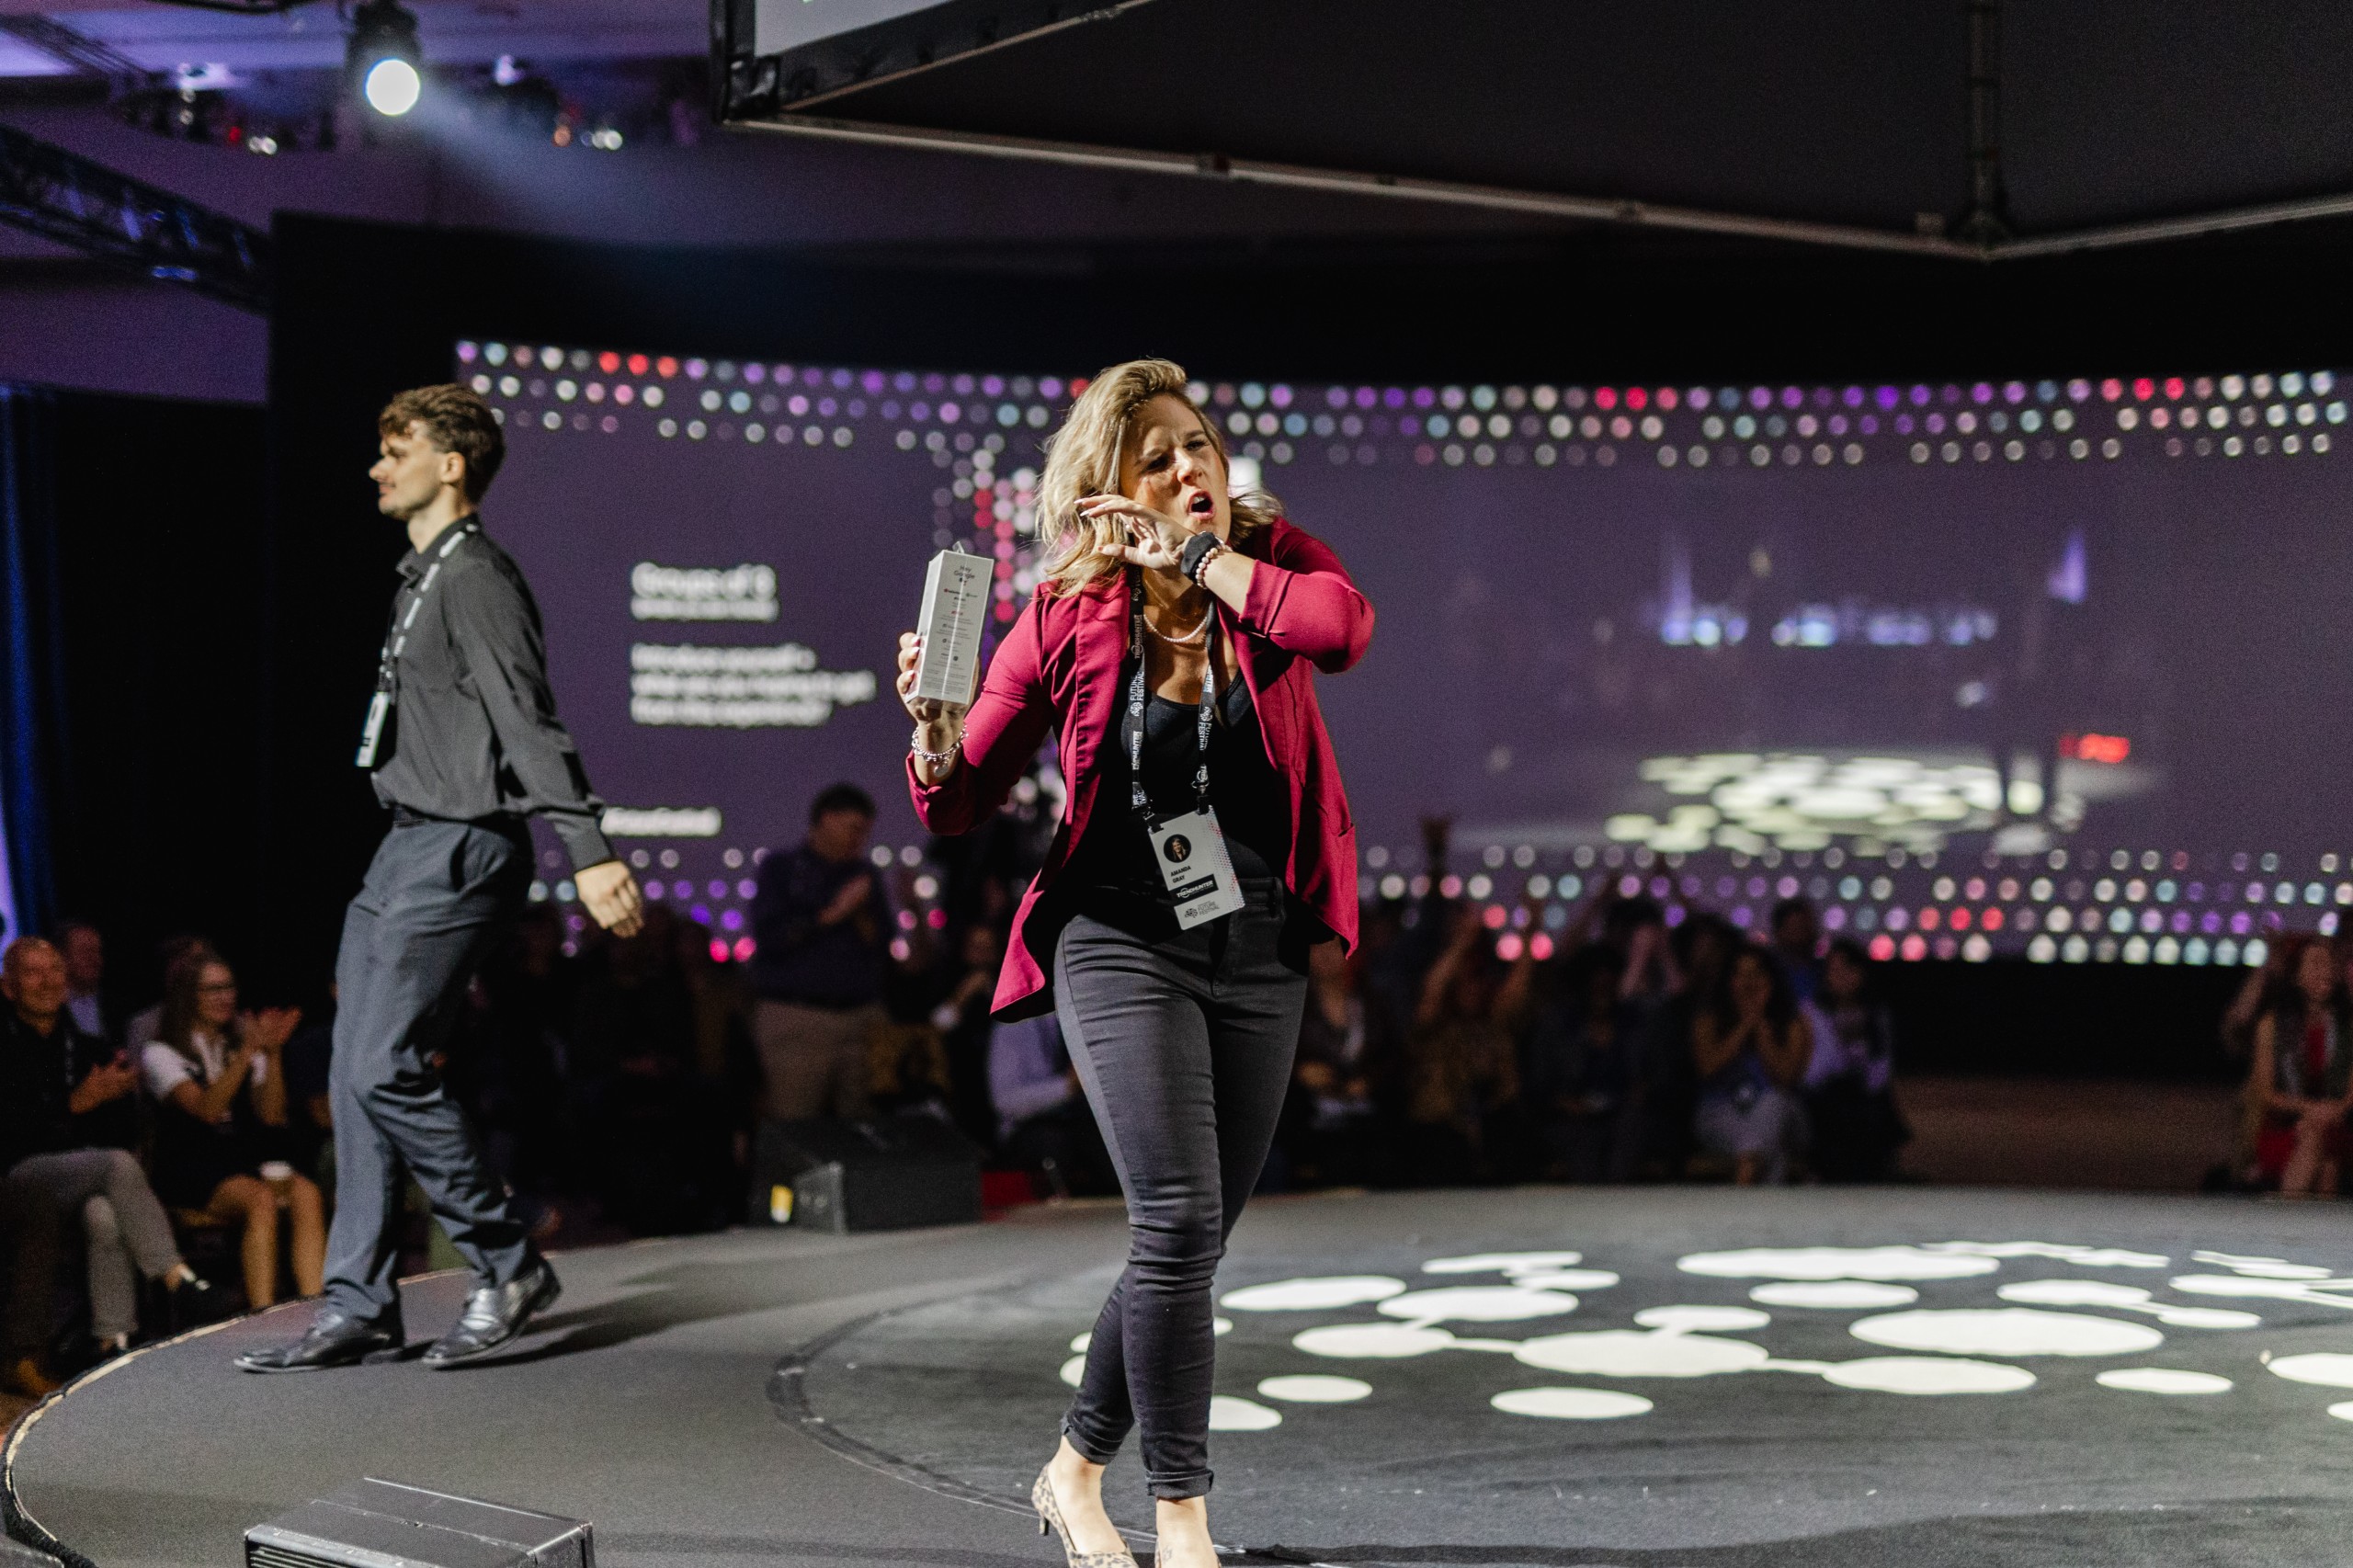 A woman is walking on a runway during an event, with a man in front of her.